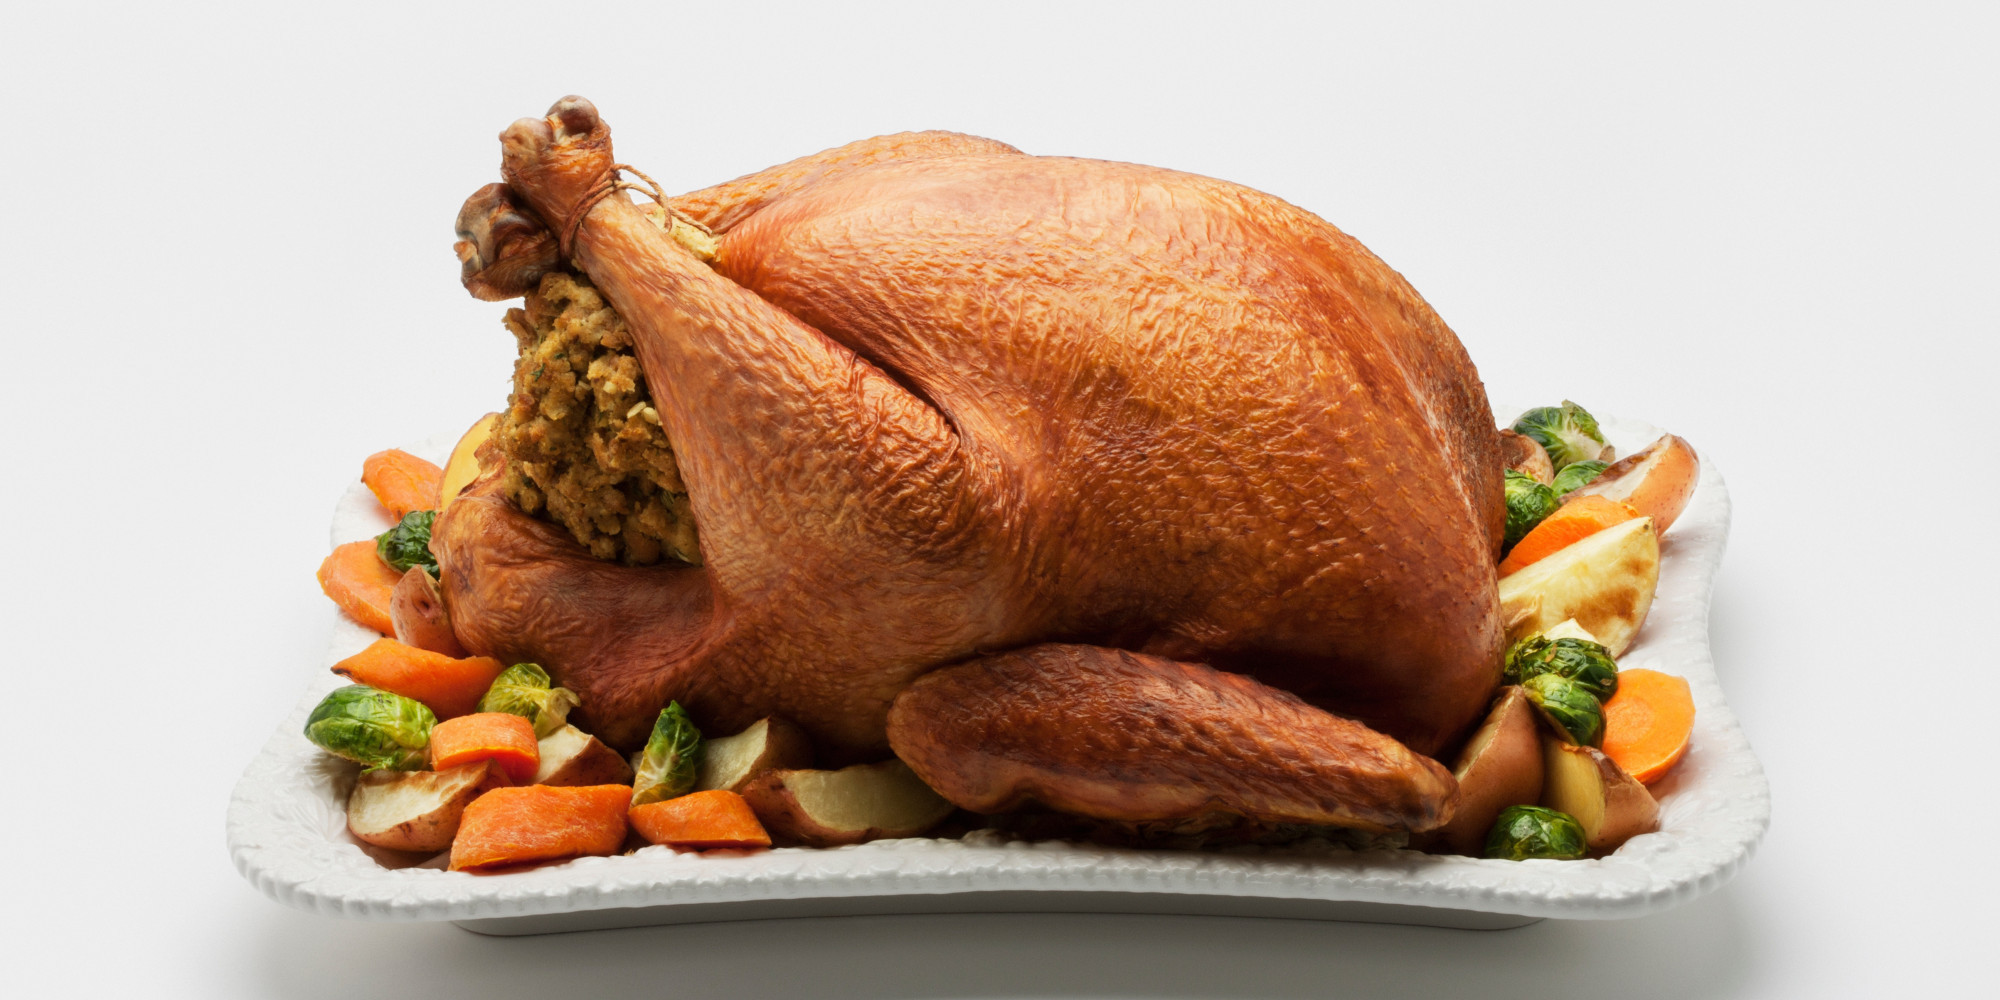 Photos Of Thanksgiving Turkey
 Tryptophan Making You Sleepy Is A Big Fat Lie